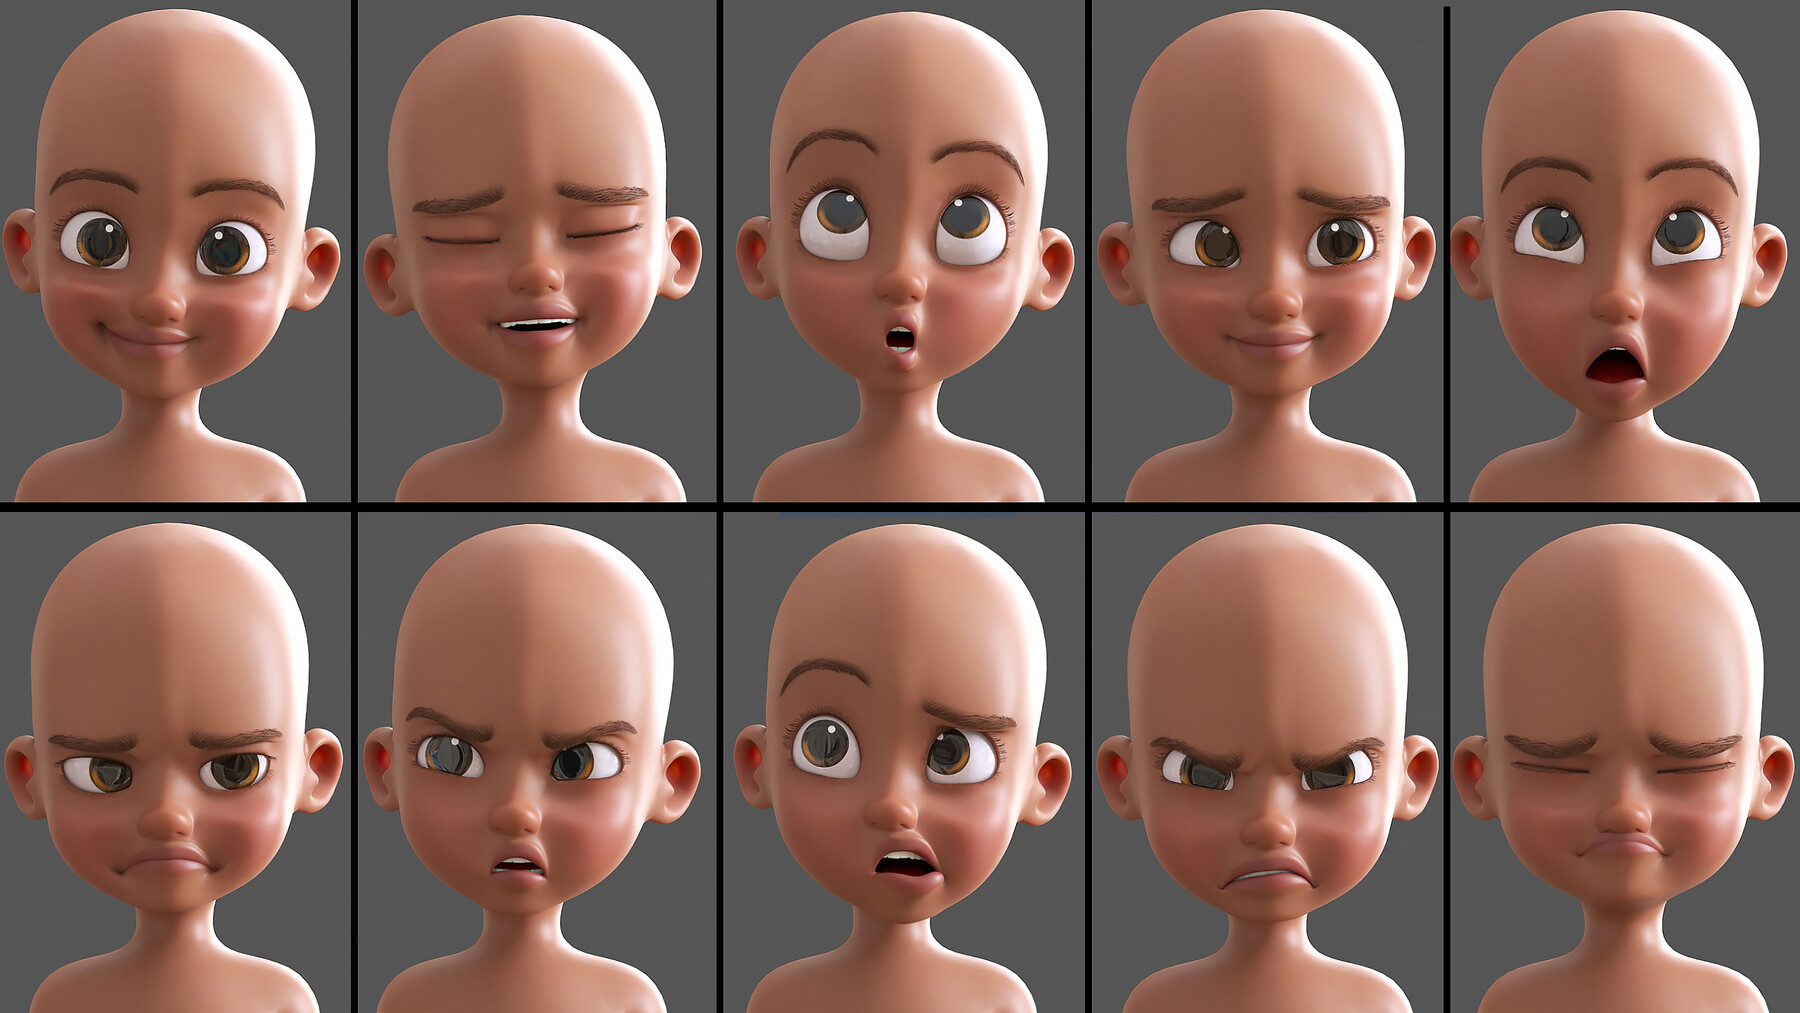 ArtStation - Cartoon Afro Girl 2 - Toon Rigged Child Character | Resources